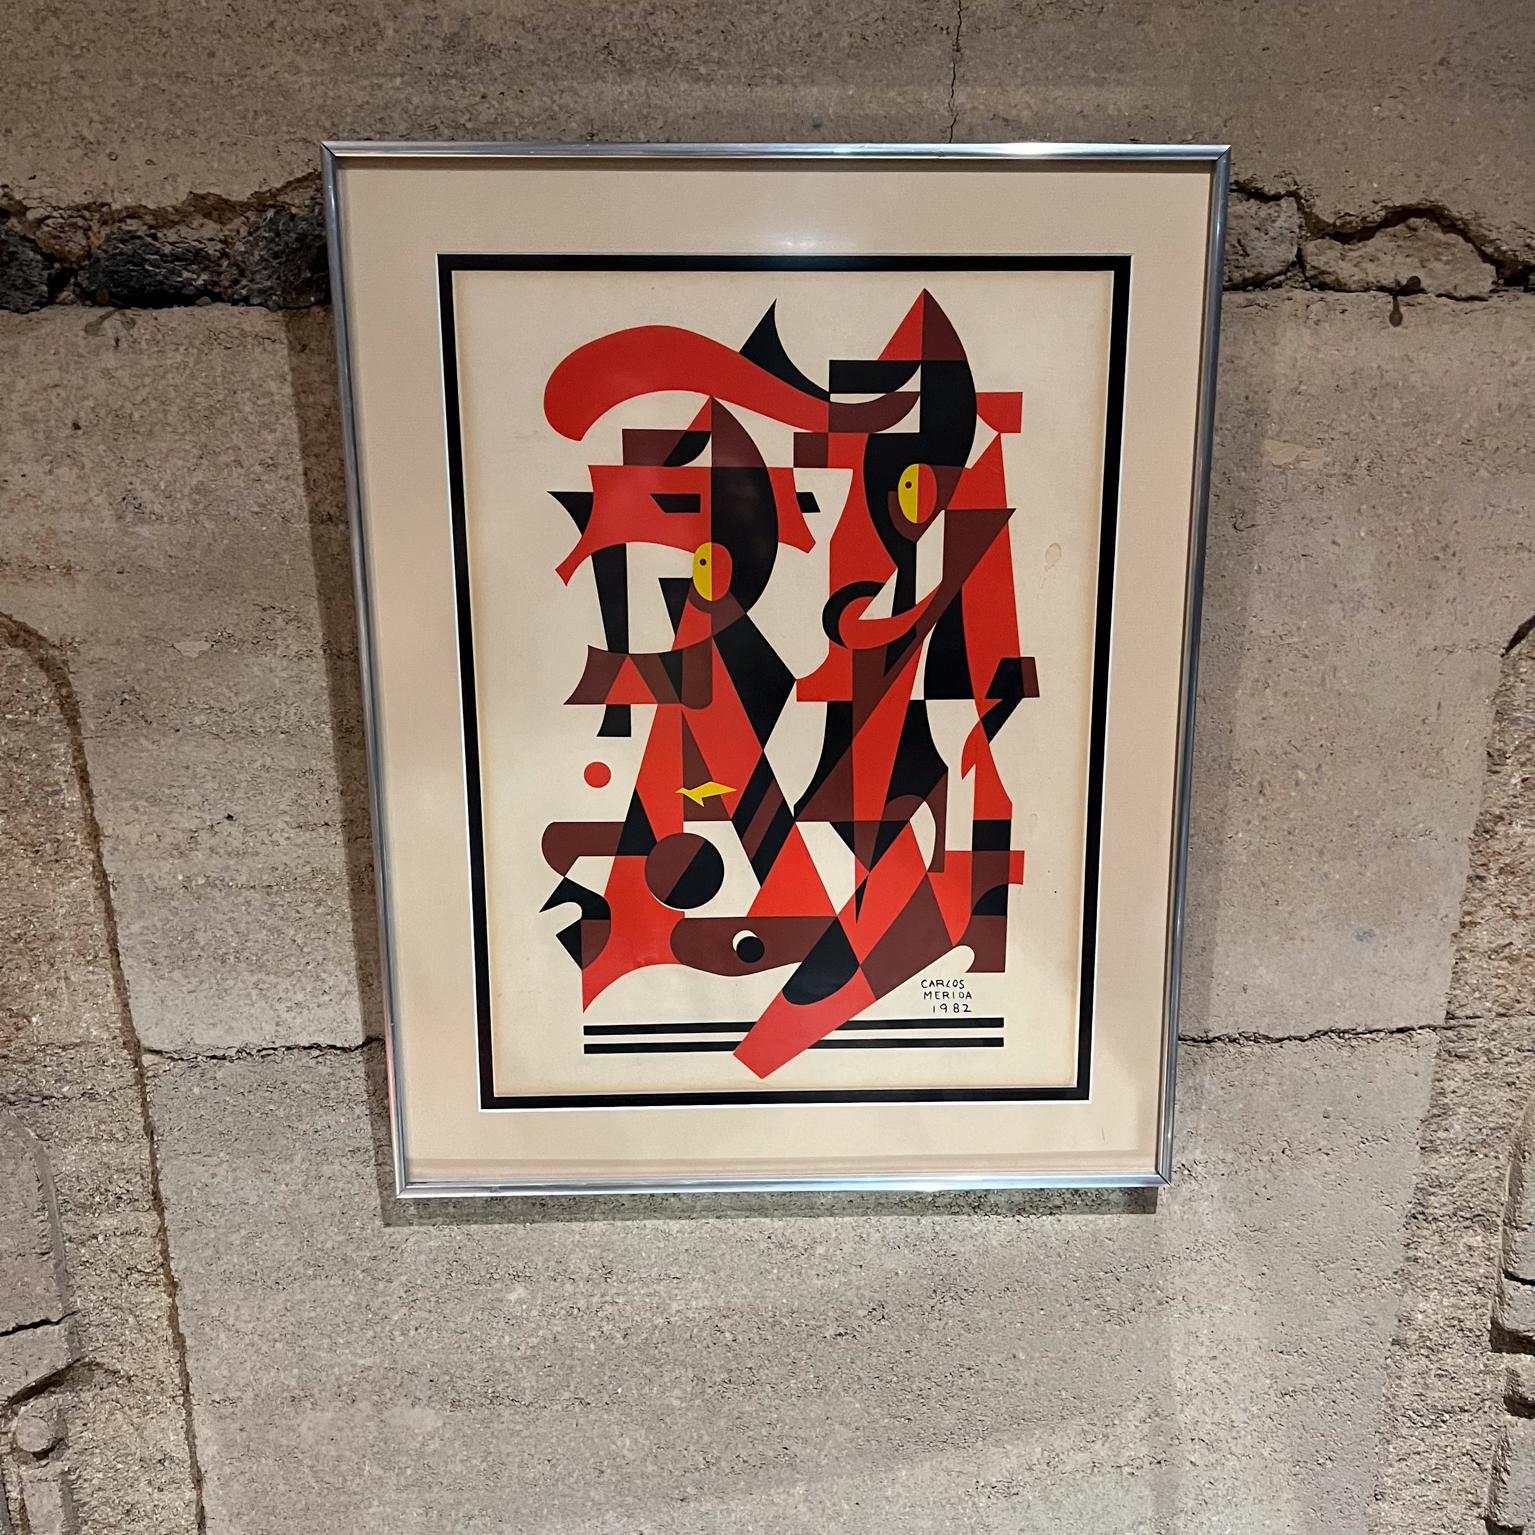 1982 Carlos Mérida Modernist Artwork Cubist
Lithograph Paper Print Drawing
24.75 x 17.5 x .88
Preowned original unrestored vintage condition. Paper shows signs of age.
Refer to all images please.